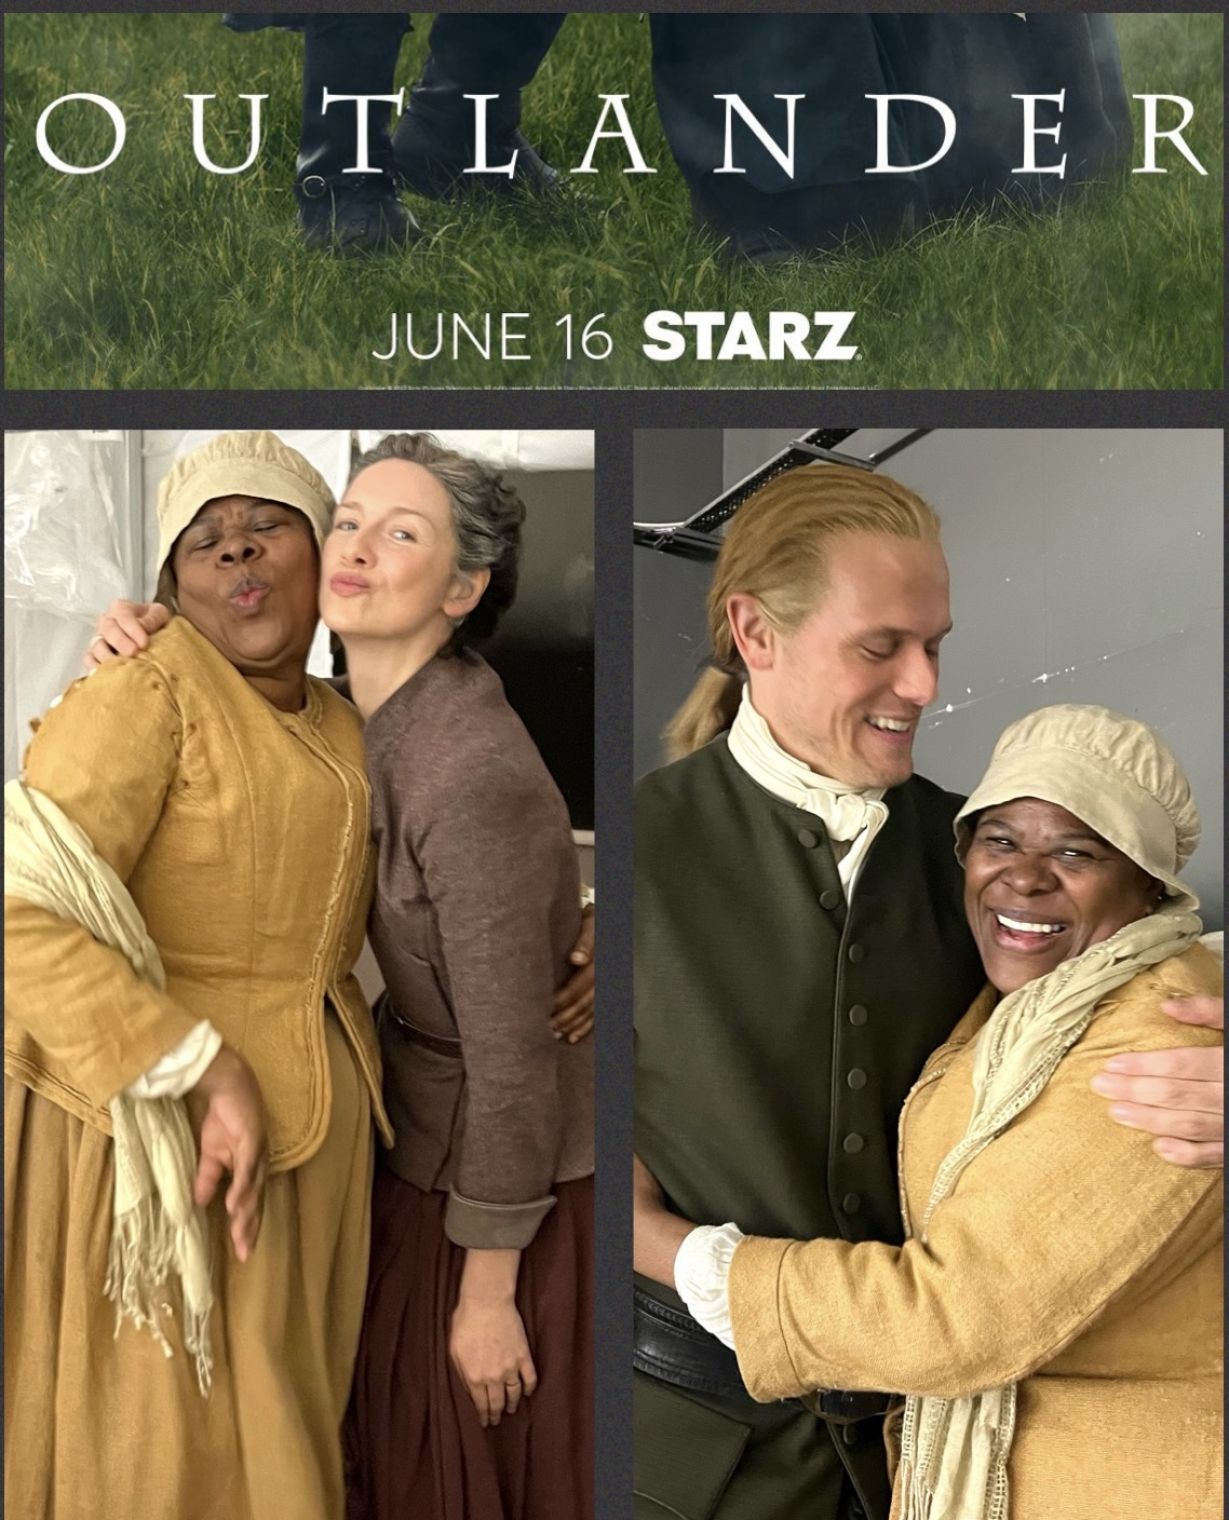 Sutara Gayle plays Lord John's feisty housekeeper Mrs Figg in Series 7 of Outlander which premieres today on Lionsgate+